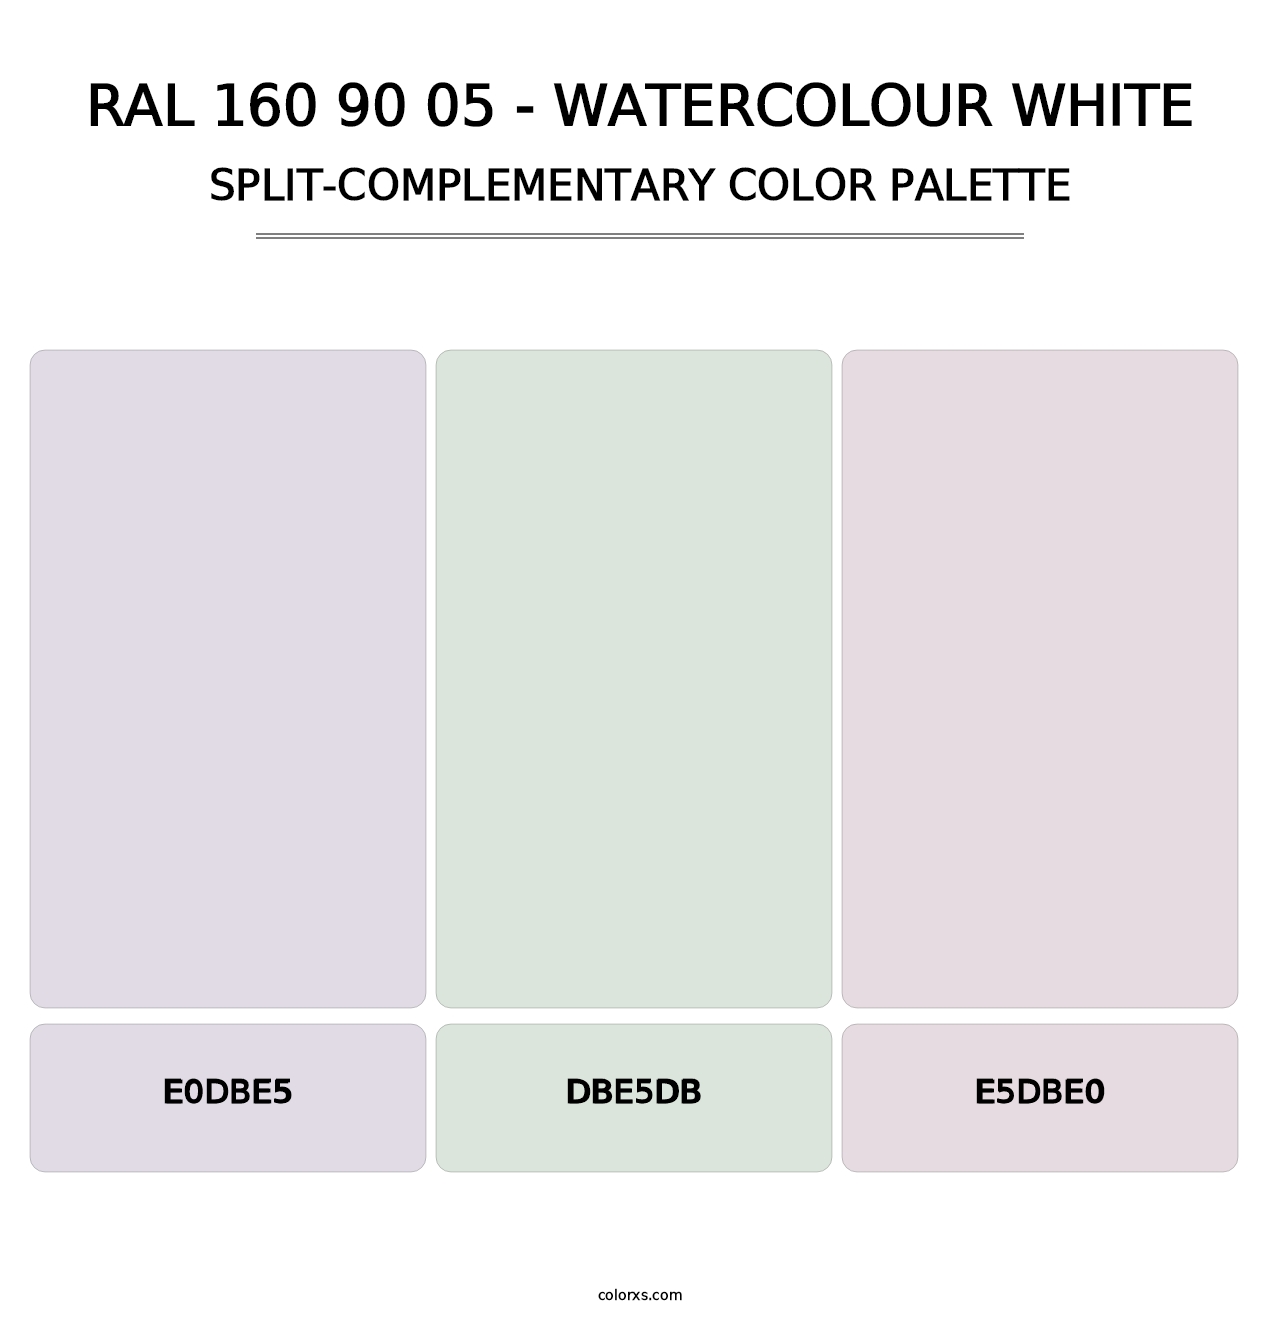 RAL 160 90 05 - Watercolour White - Split-Complementary Color Palette